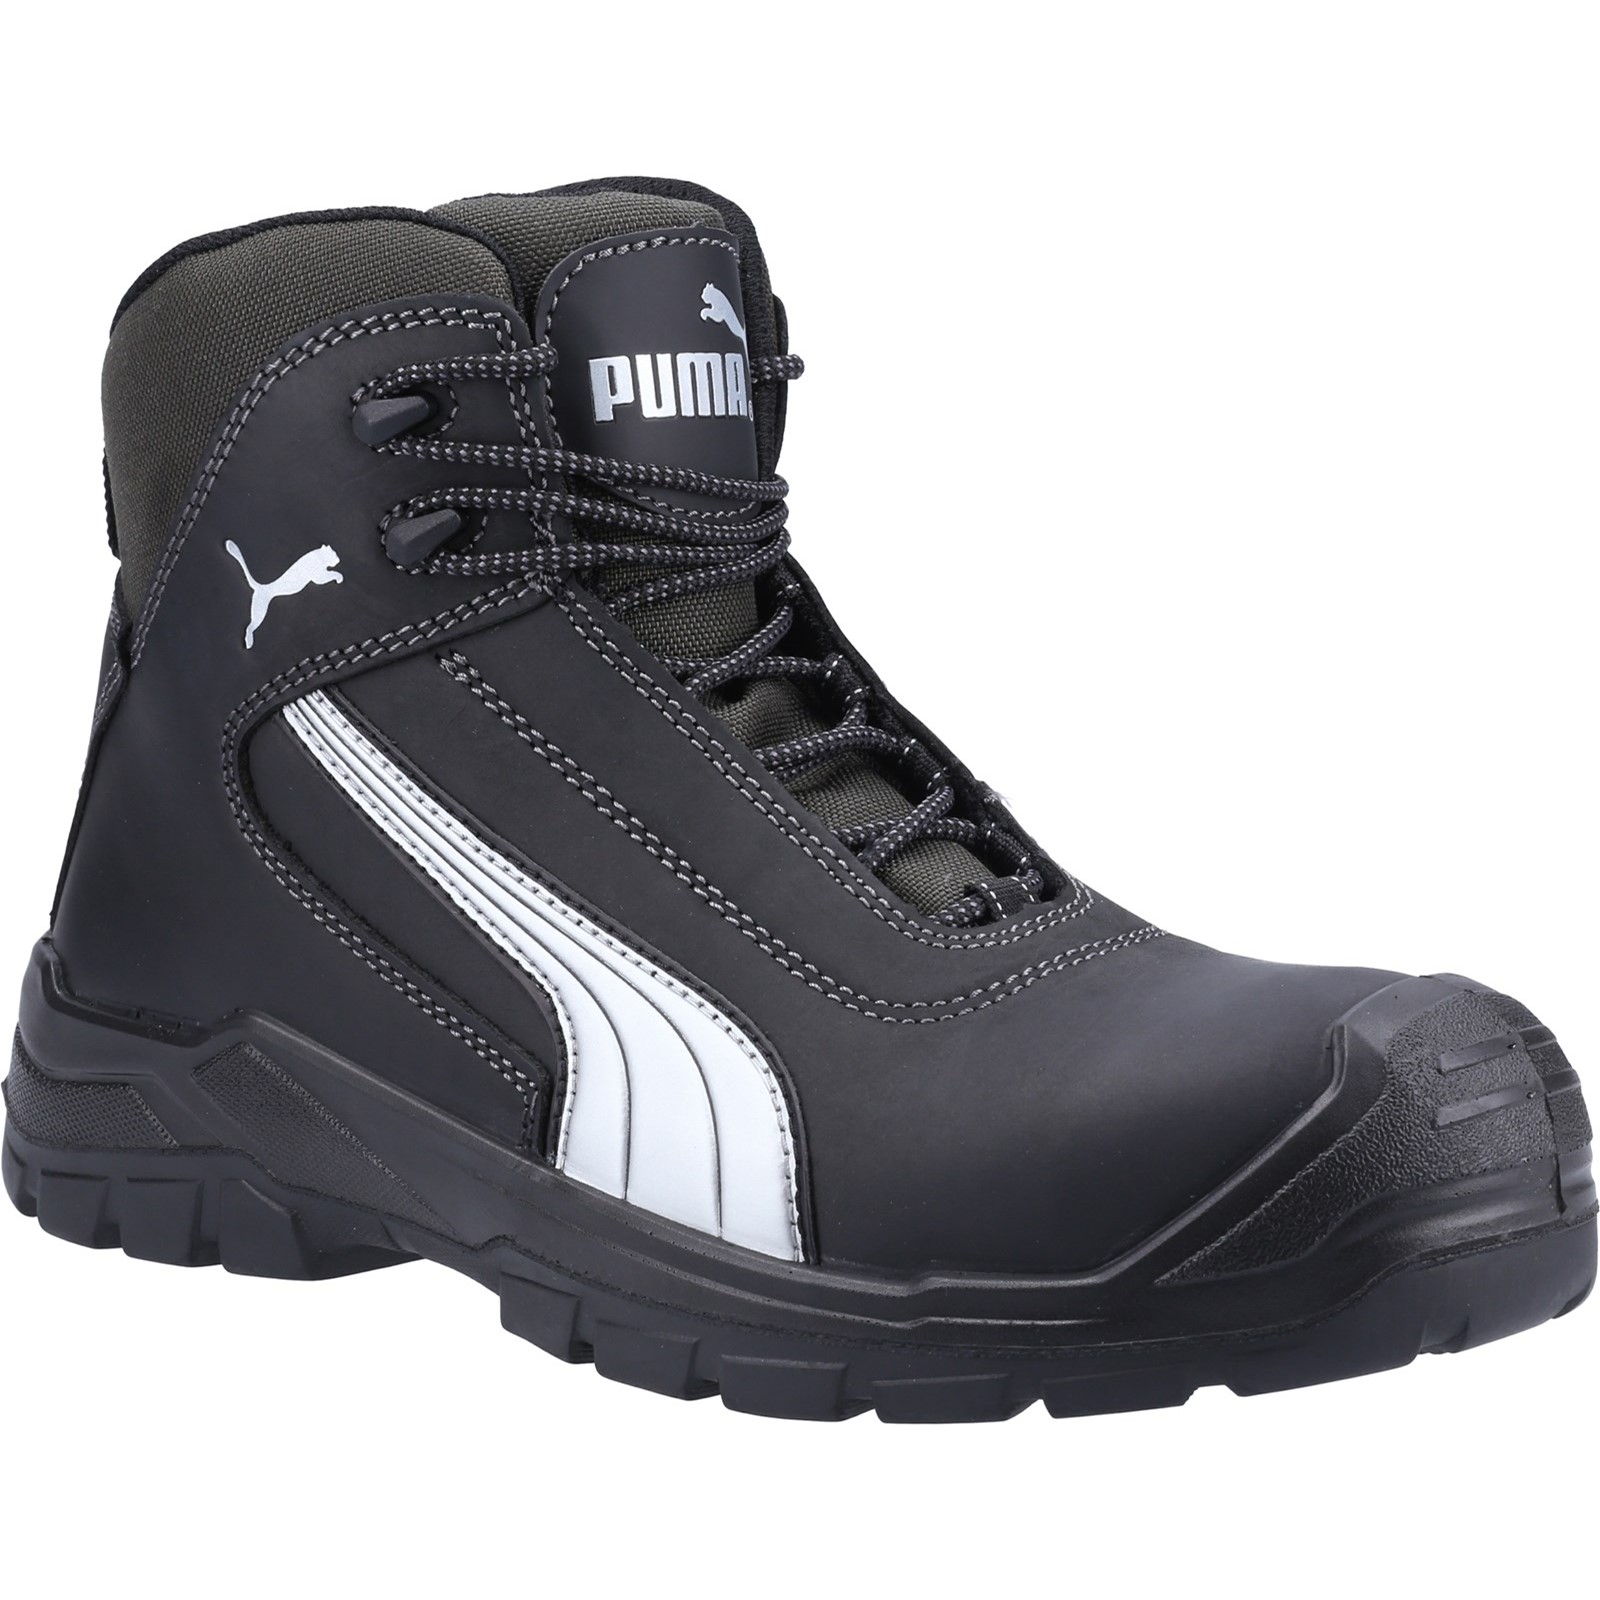 Cascades Mid S3 Safety Boot